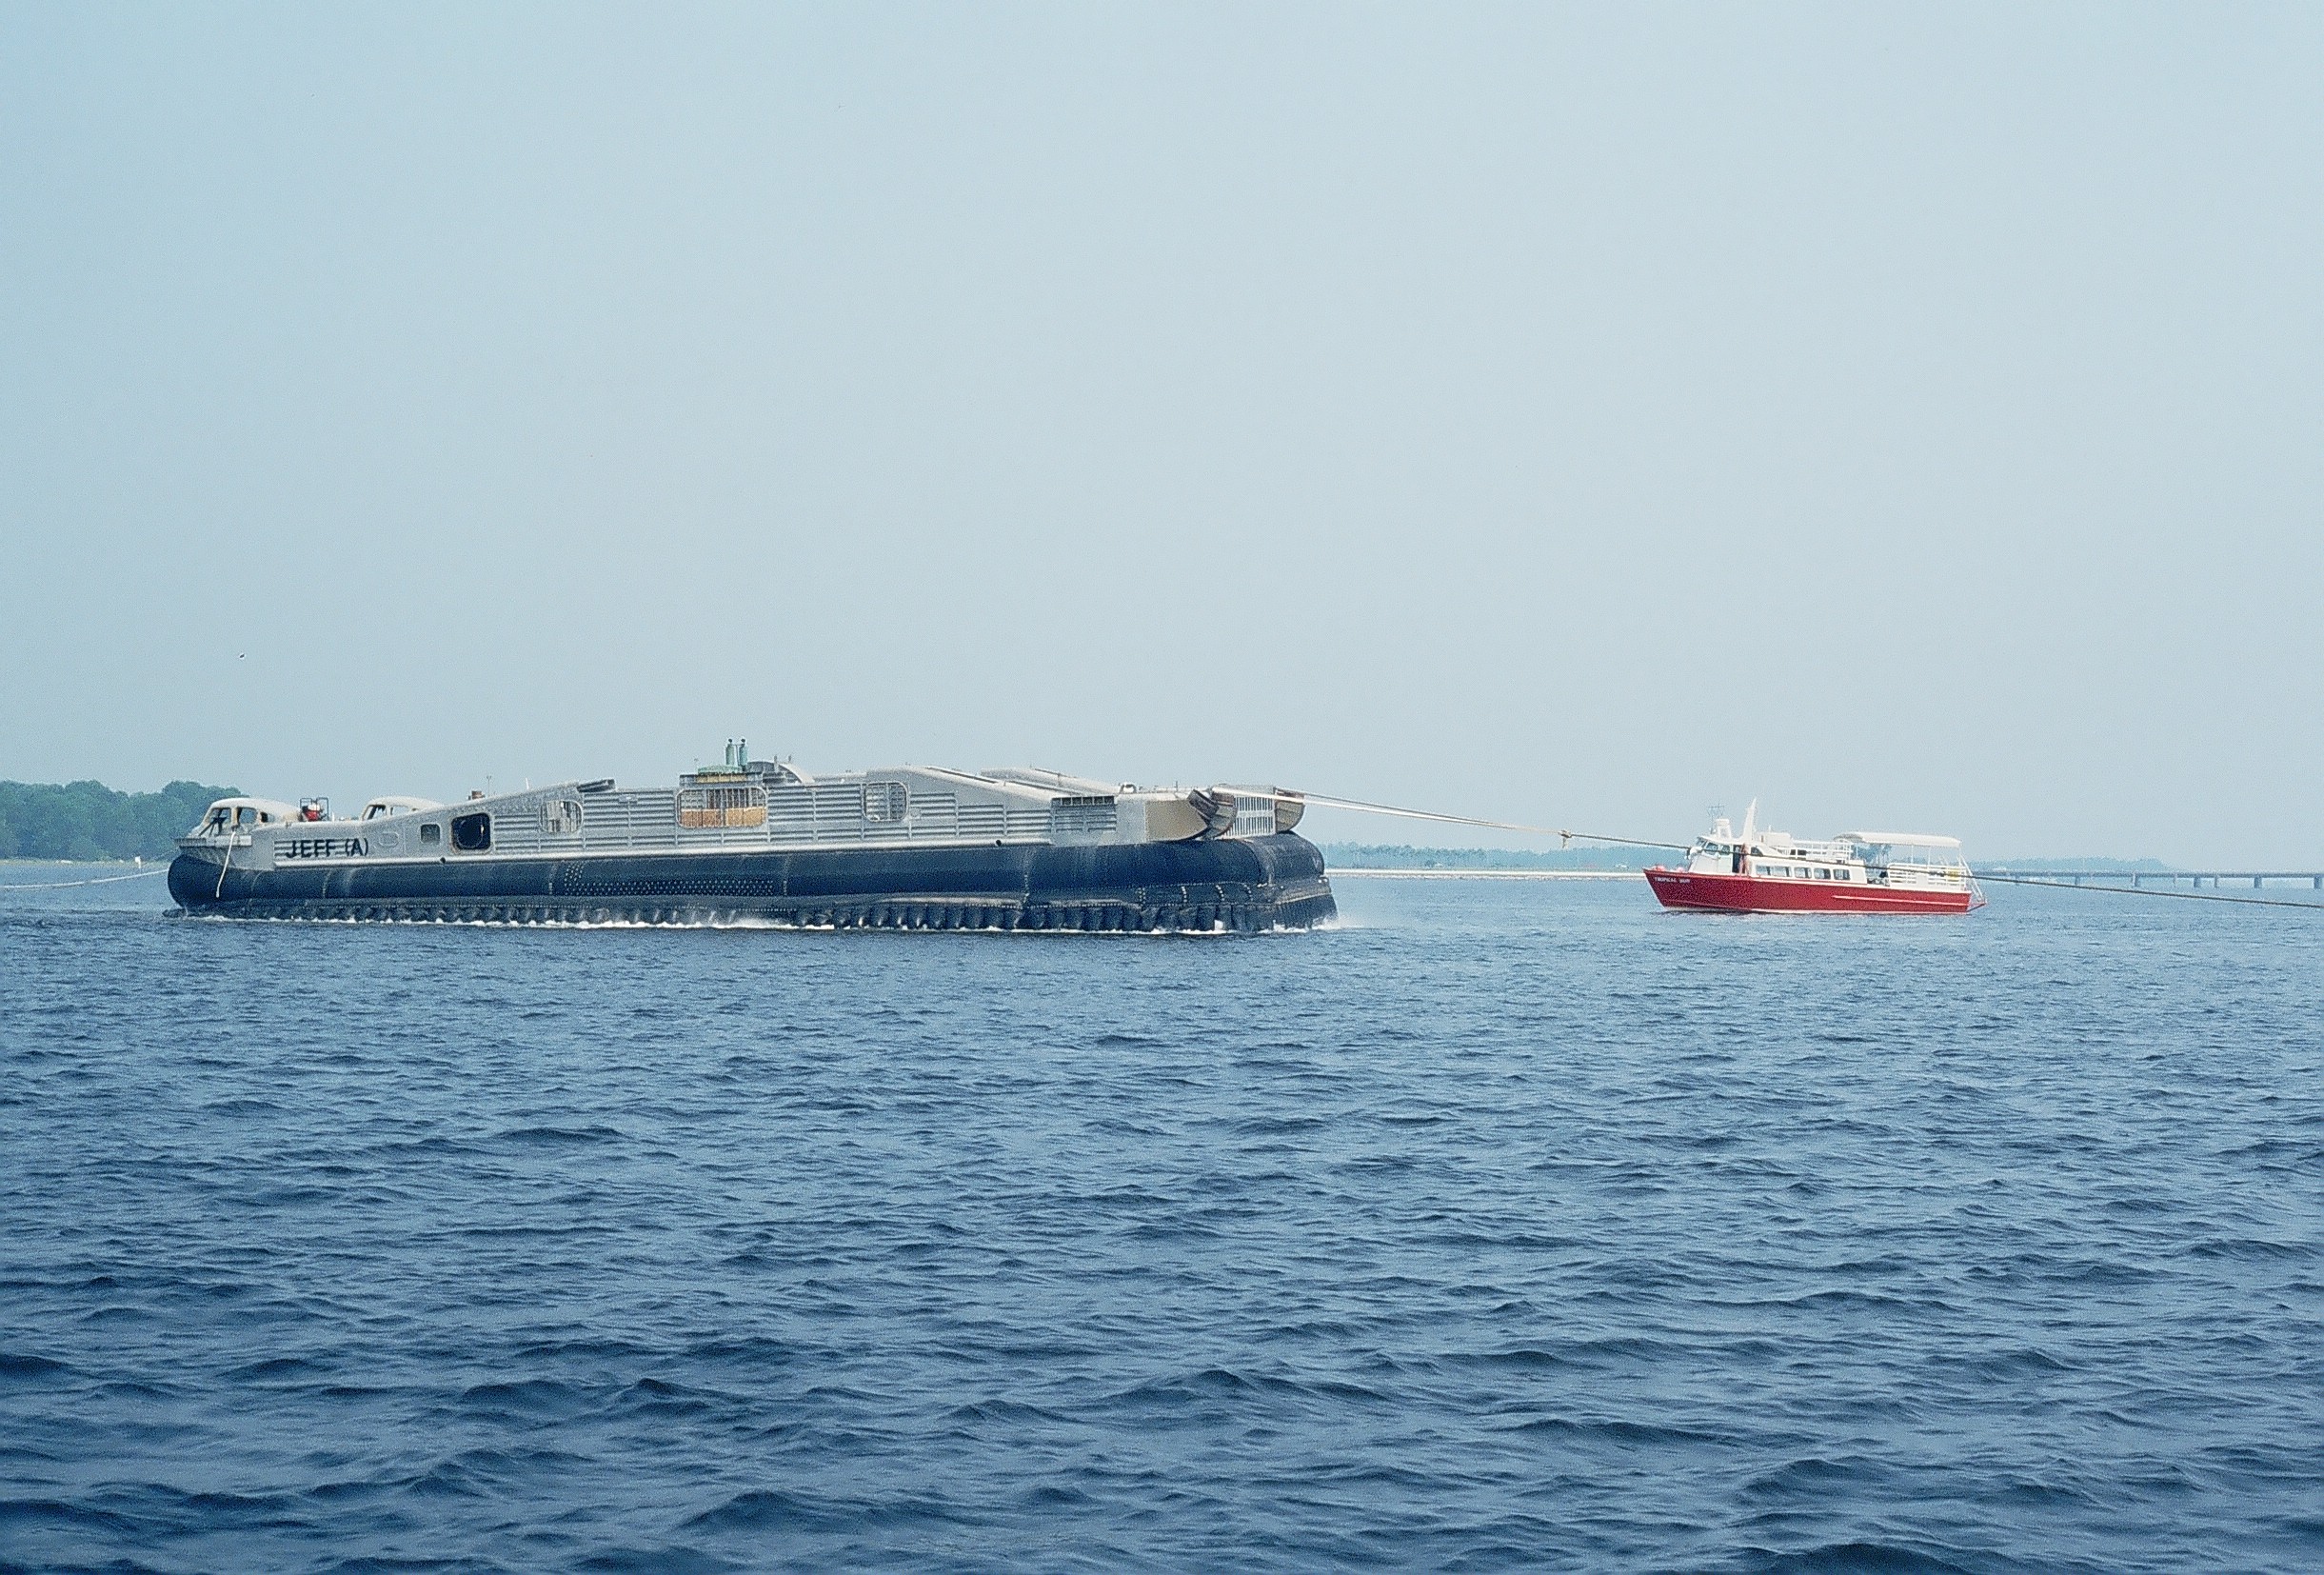 The LCAC/Hovercraft